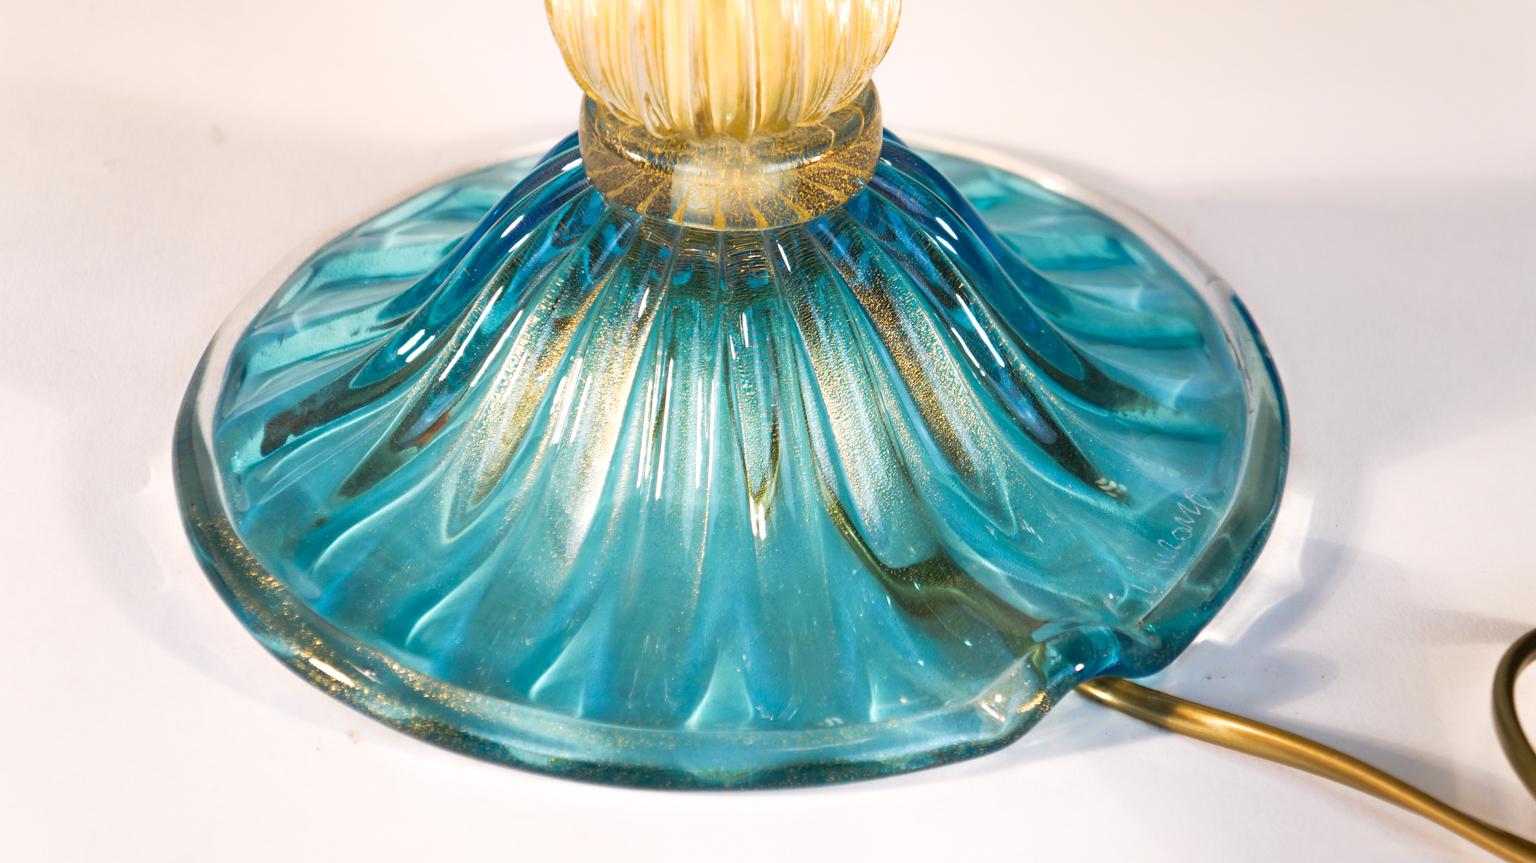 Alberto Donà Pair of Light Blue Italian Murano Glass Table Lamps Veronese, 1980s For Sale 4